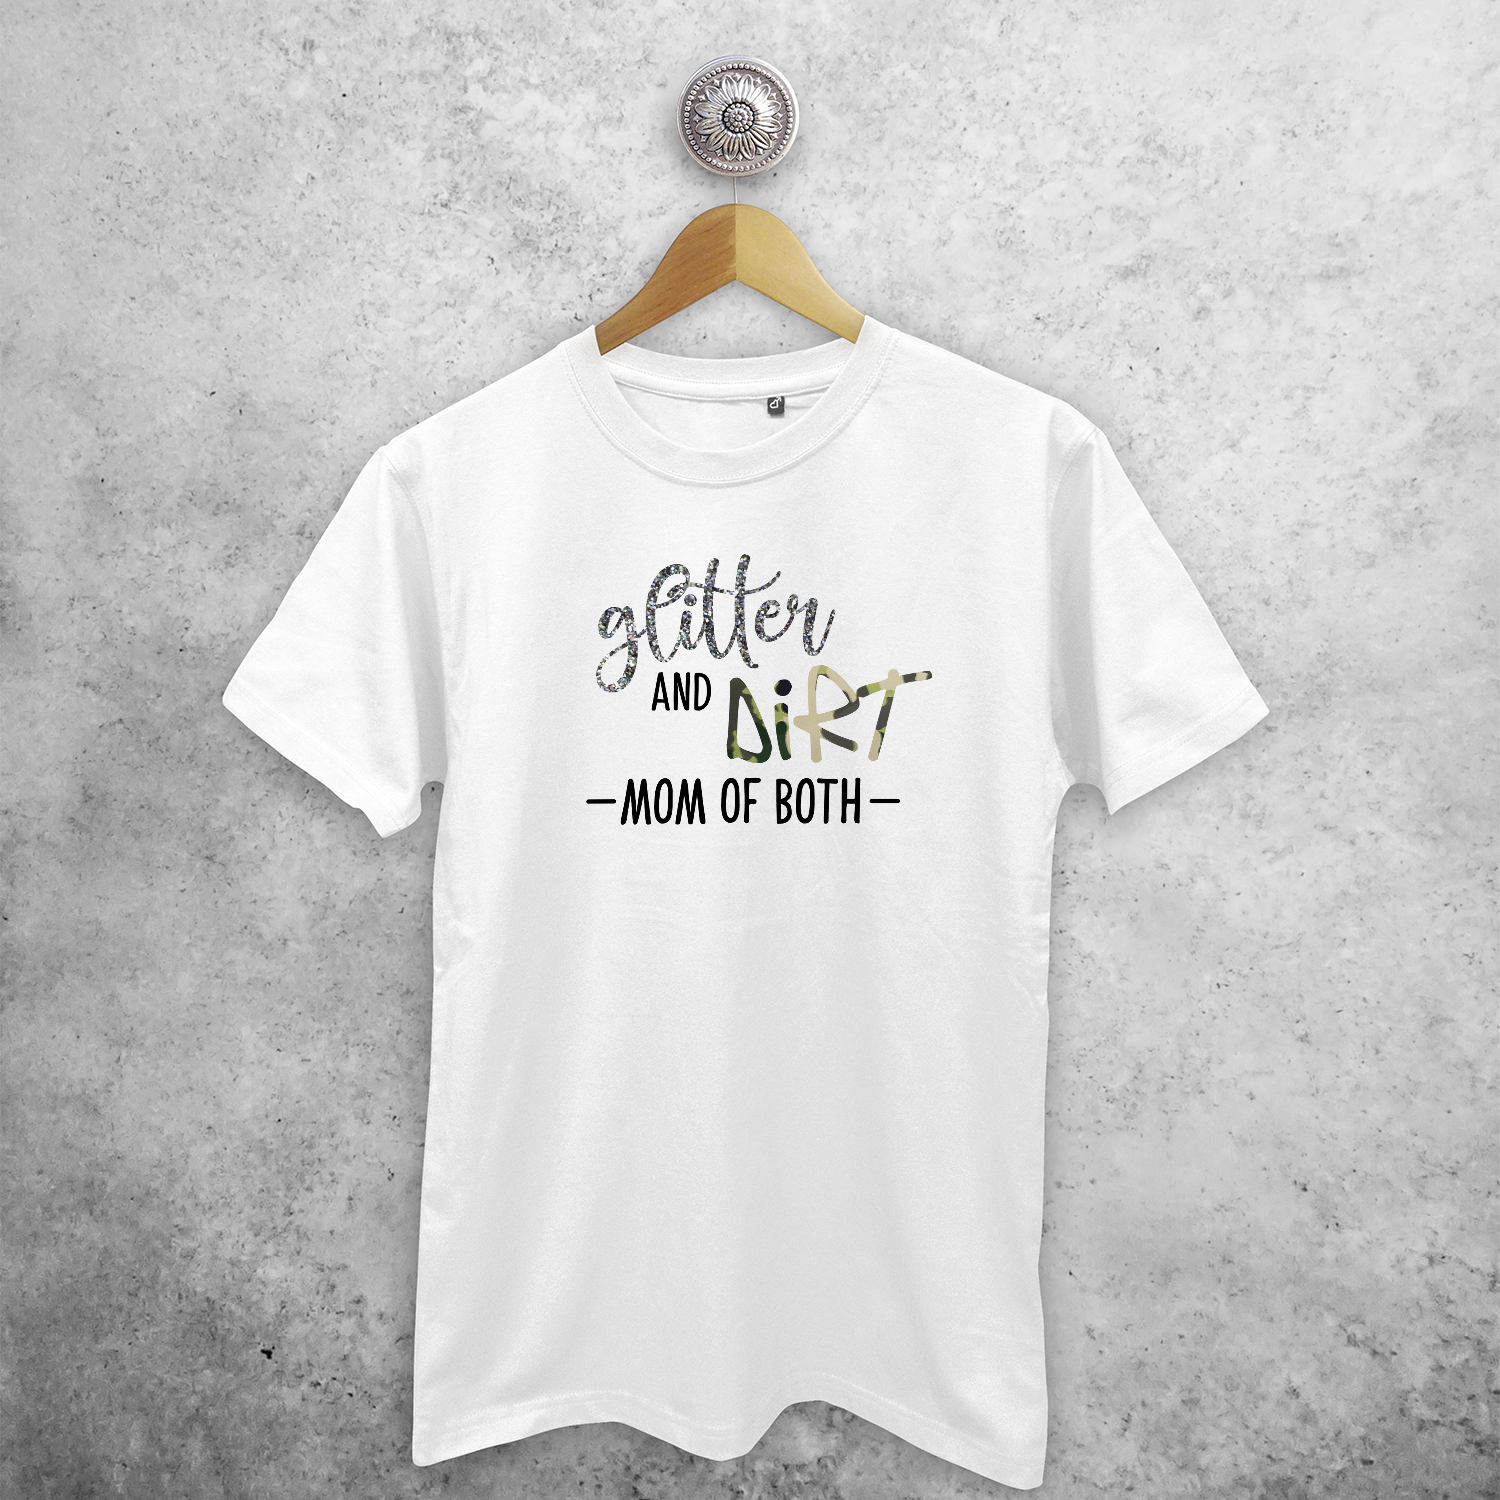 'Glitter and dirt - Mom of both' adult shirt